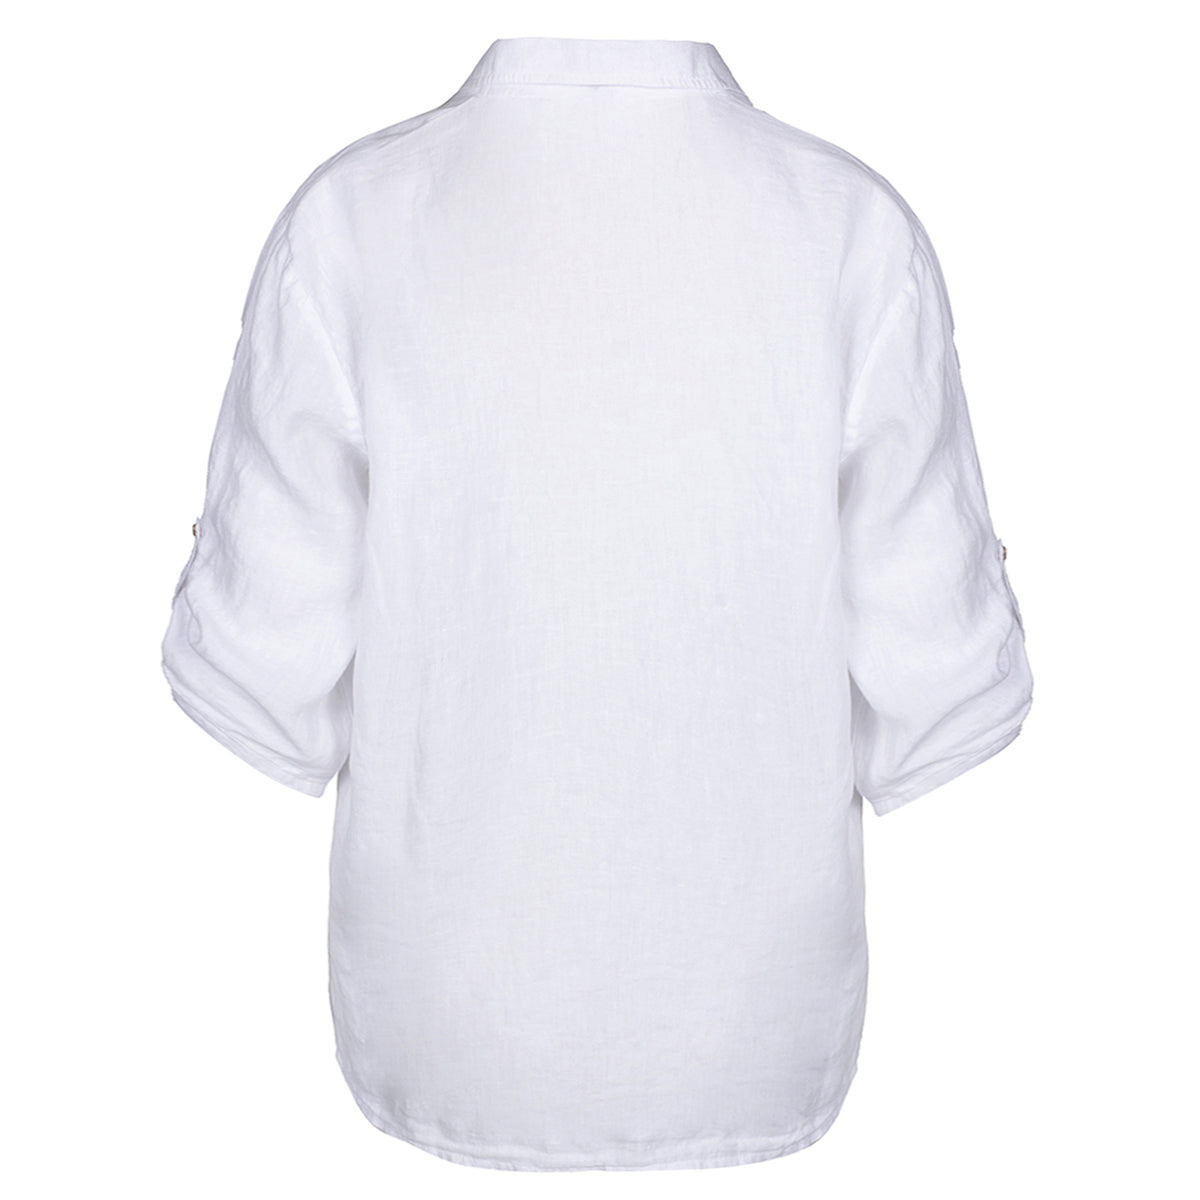 LUXZUZ // ONE TWO Siwaia Blouse Blouse 902 Natural White